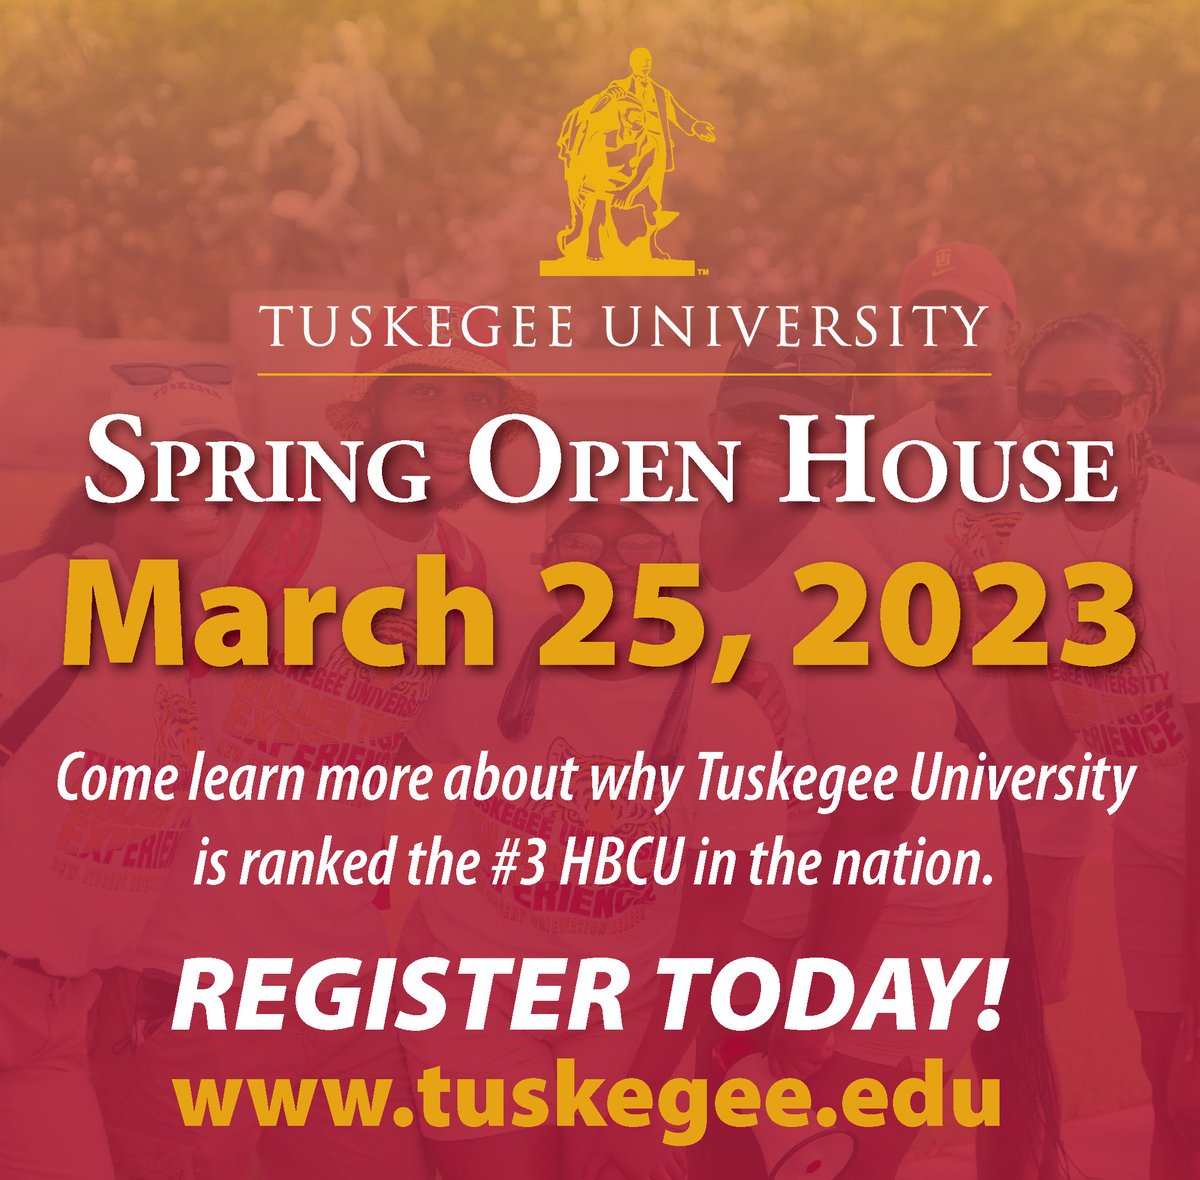 The Tuskegee University Office of Admissions invites you to Register for the Spring Open House on Saturday, March 25. Learn more at: tuskegee.edu/admissions/ope… #OneTuskegee #HBCUOpenHouse #toprankedhbcu #3HBCU